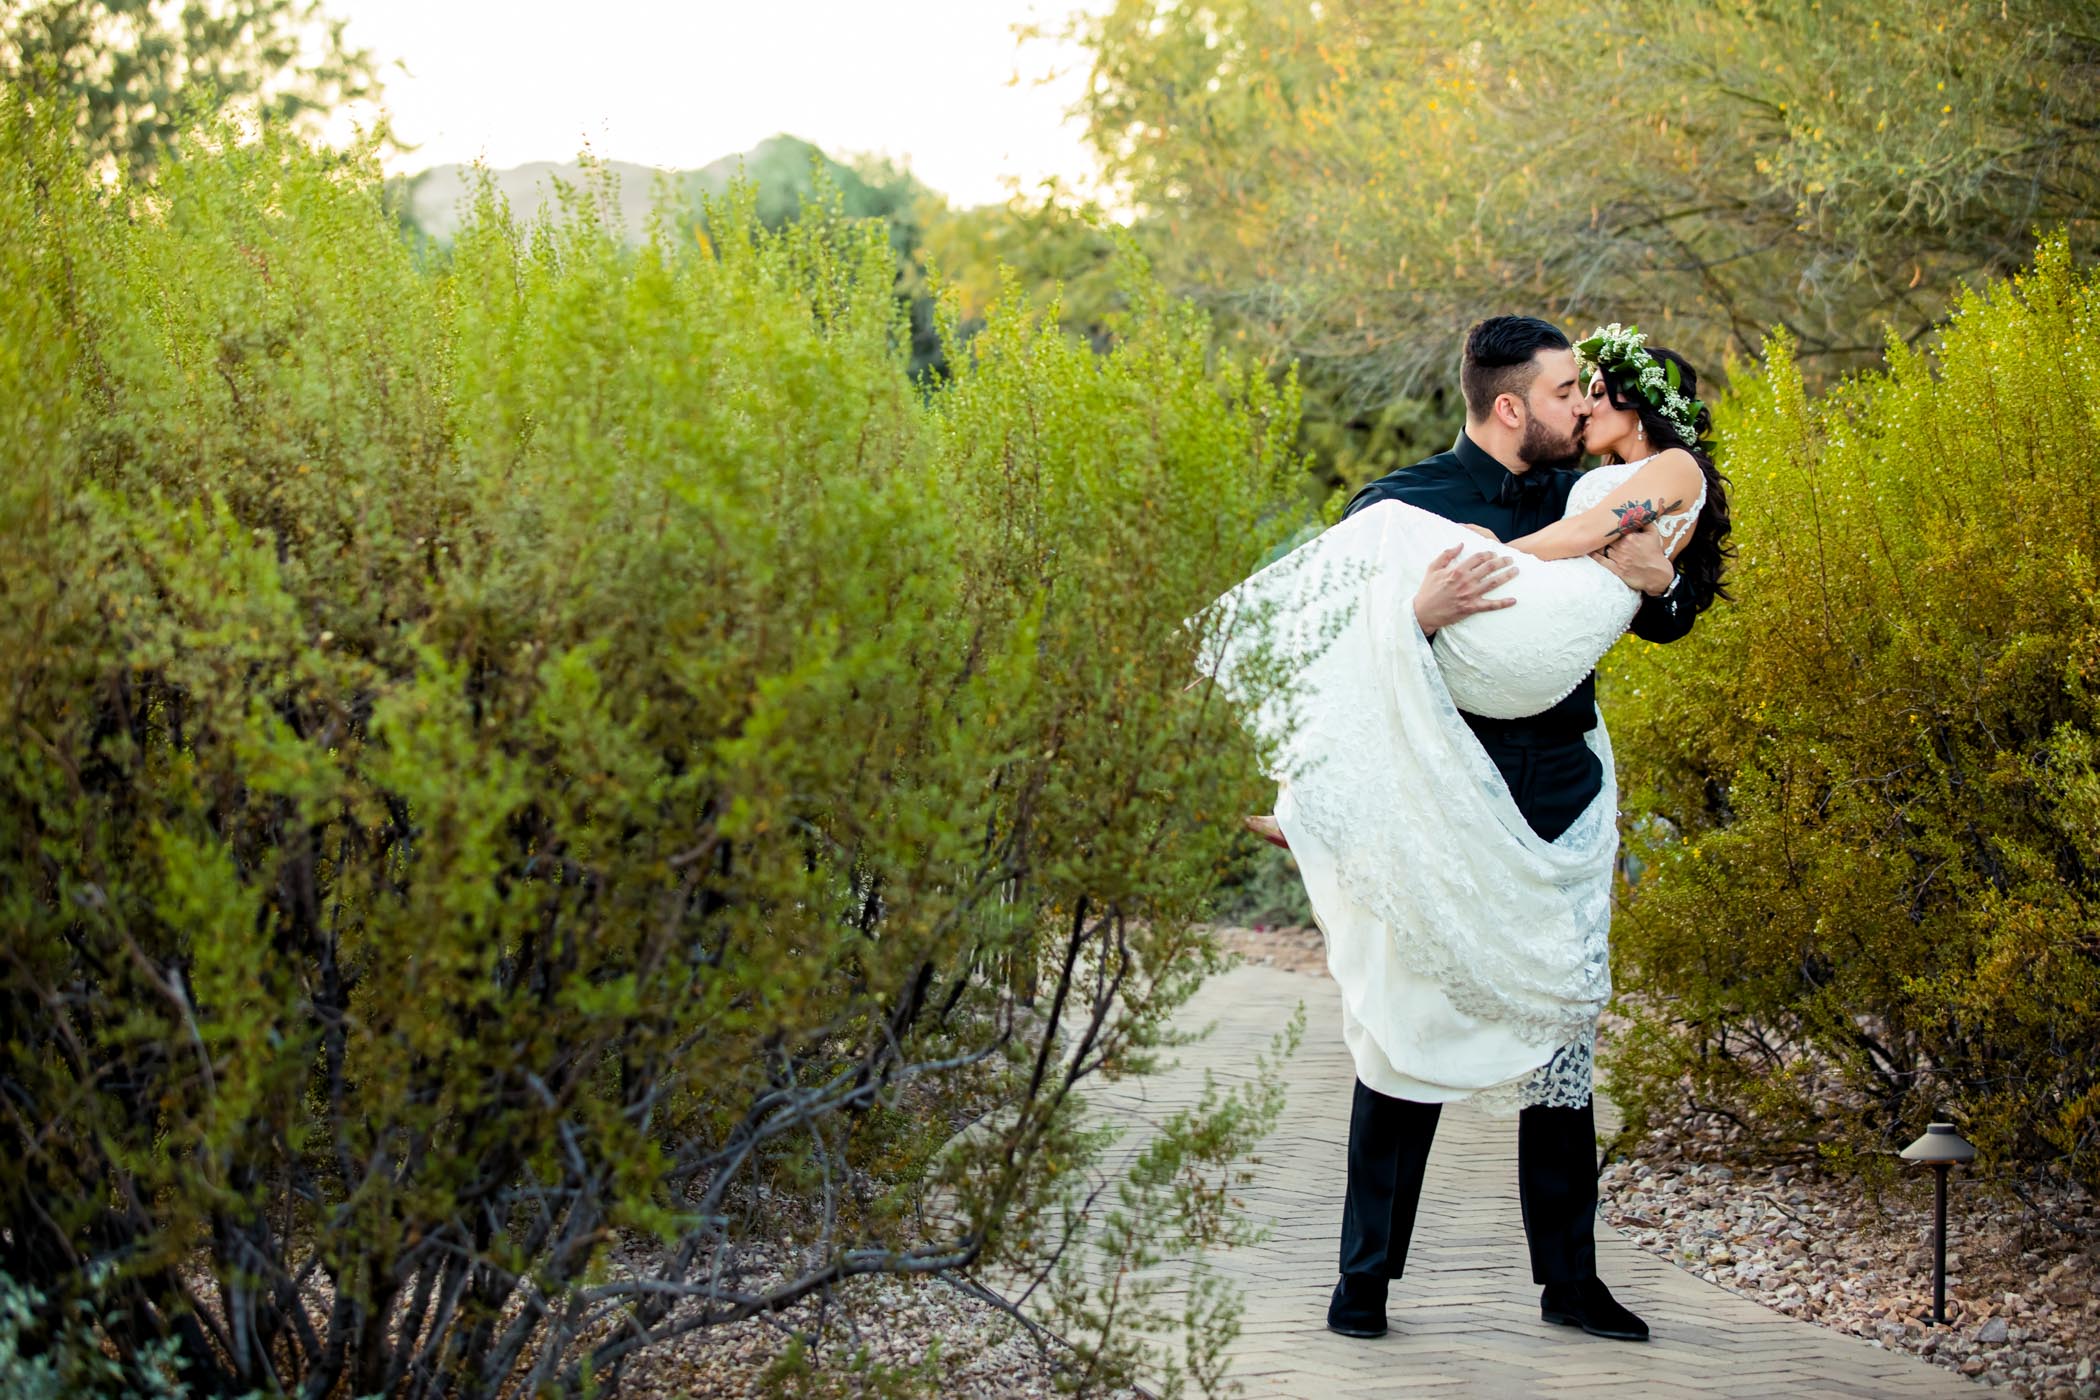 Groom picking up bride and kissing on desert path